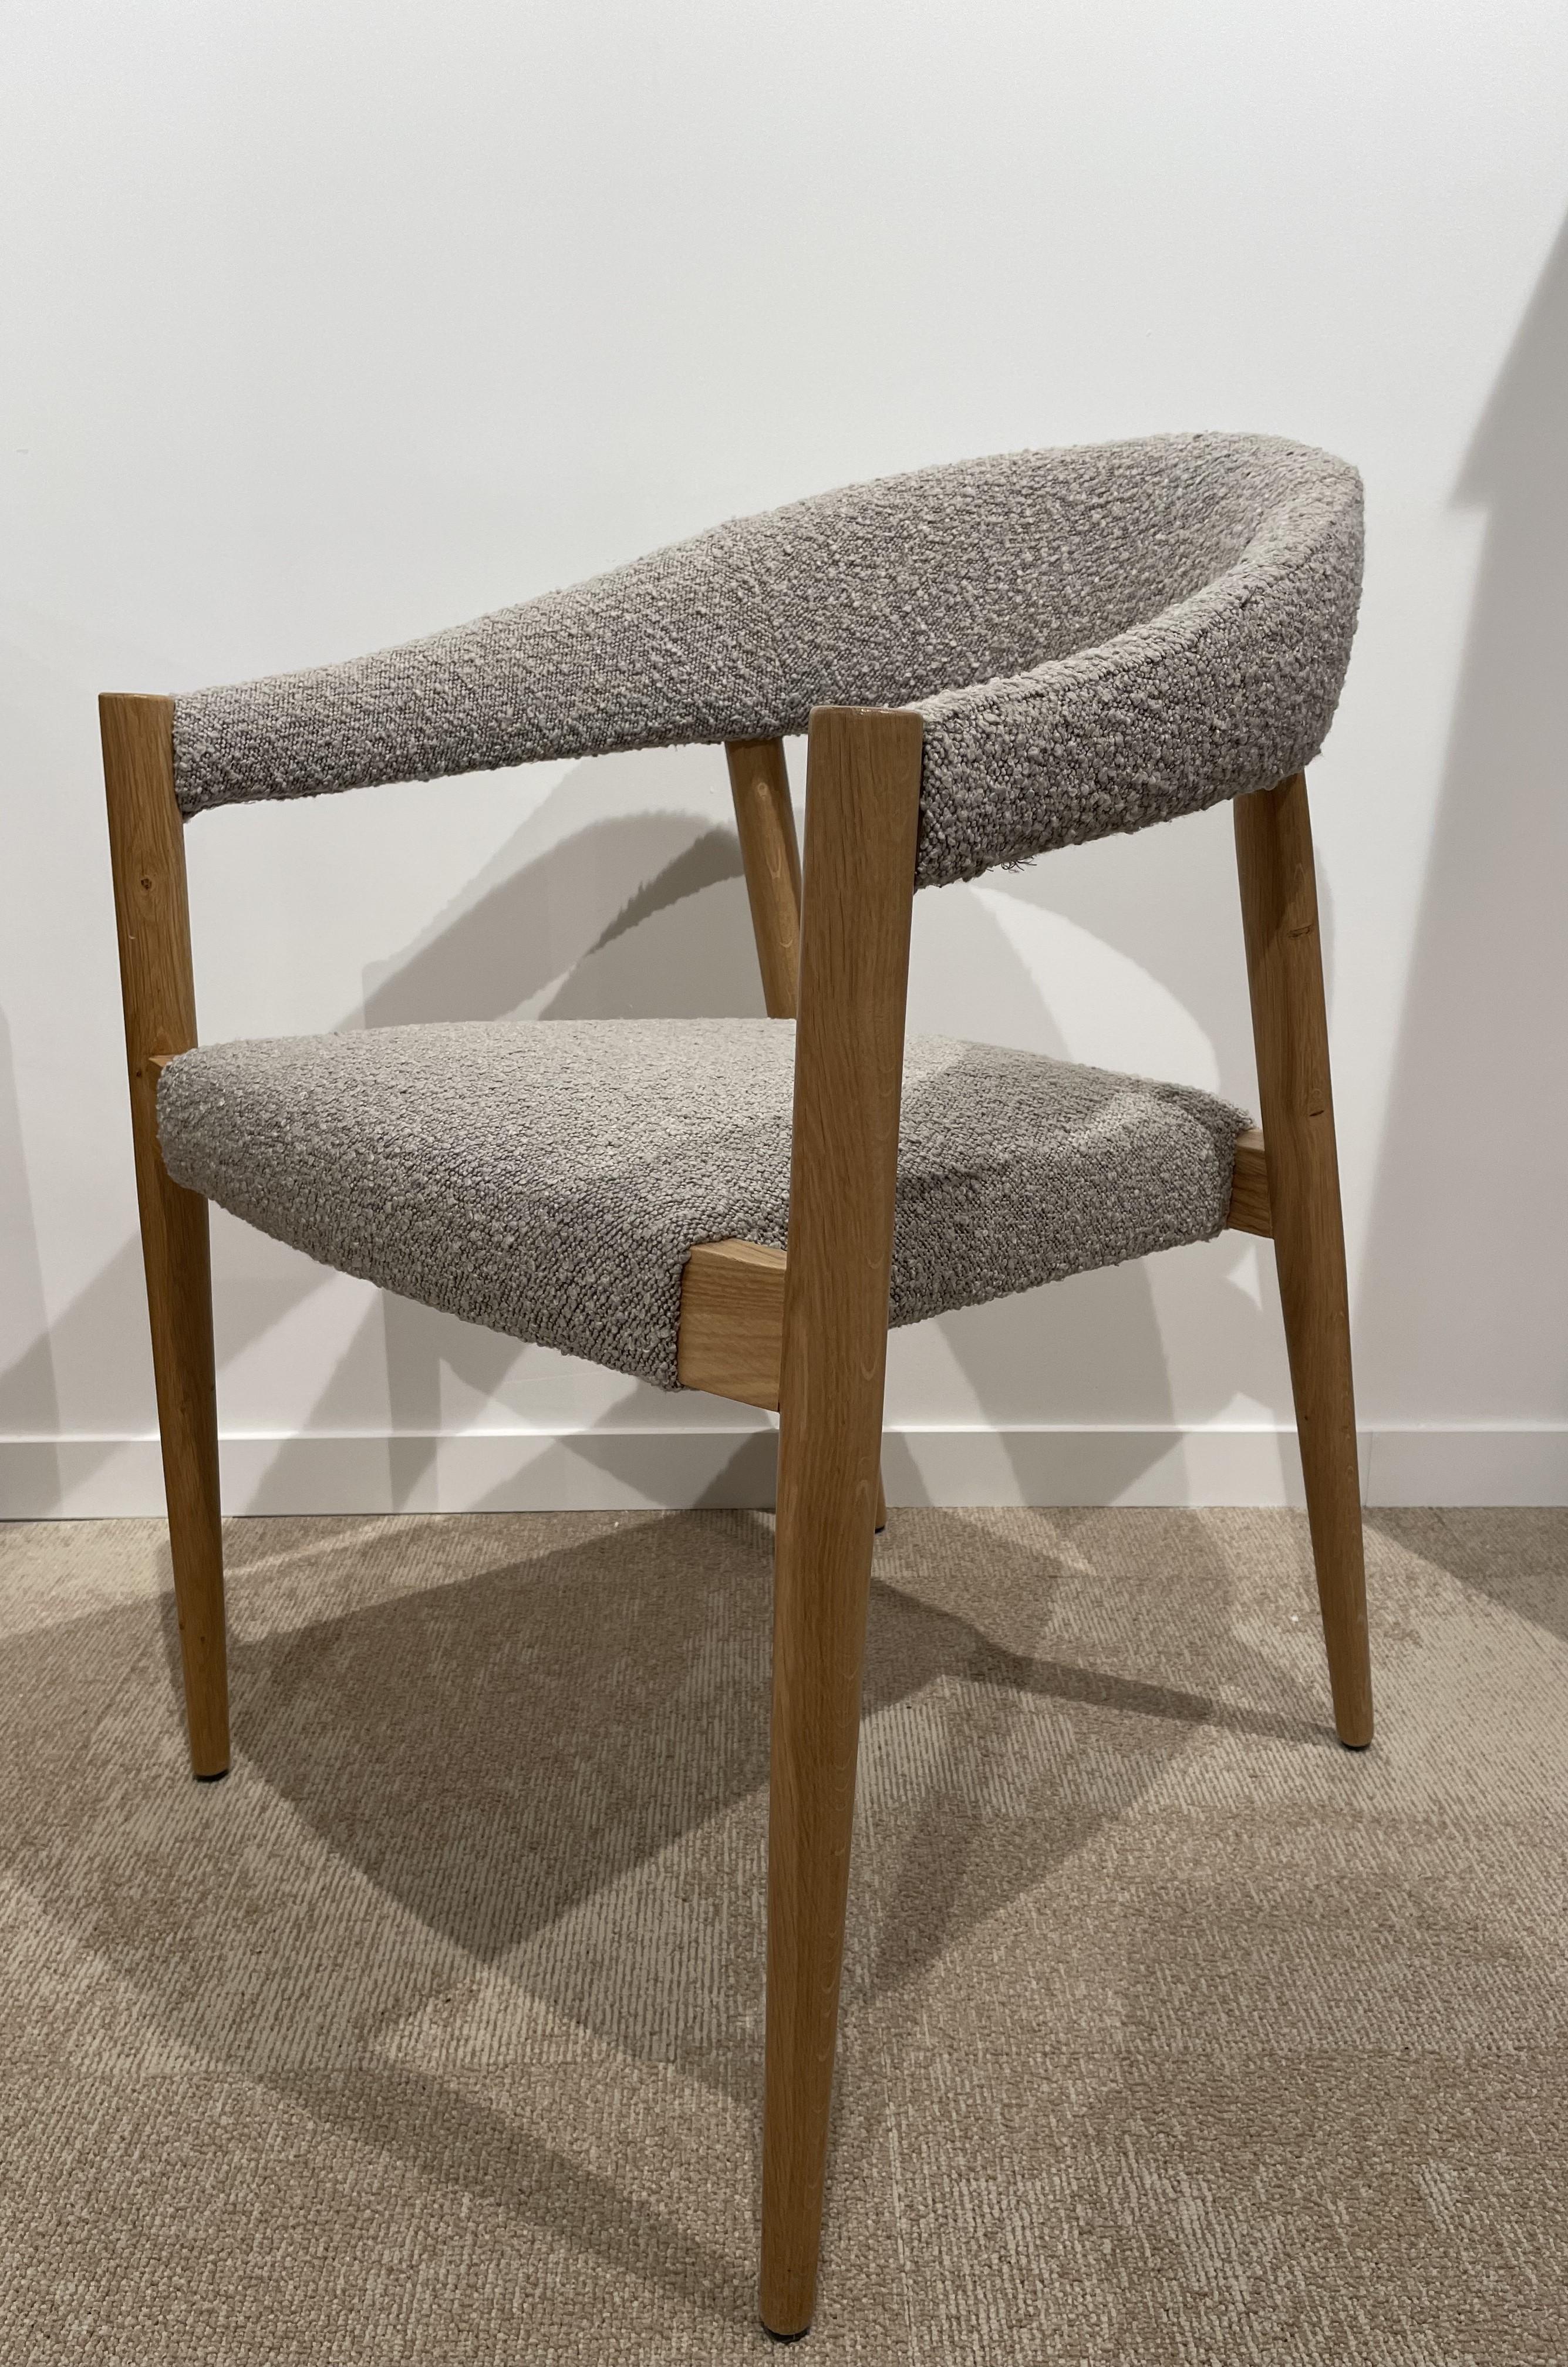 1960s Danish Design and Scandinavian Style Wooden and Bouclé Fabric Chair For Sale 3